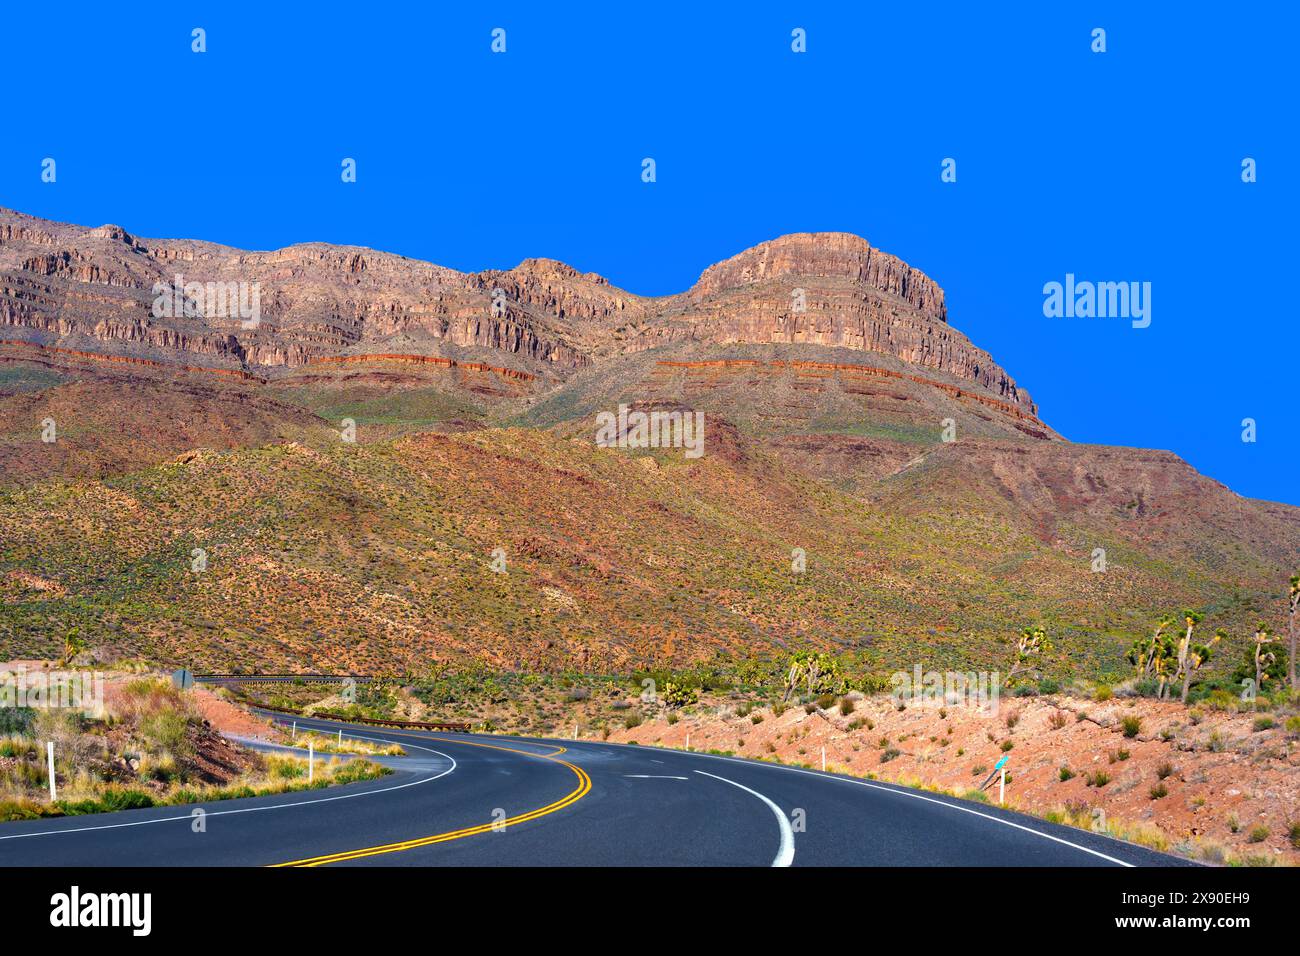 Asphalt road with bright yellow dividing lines winds through Arizona's rugged terrain under the clear blue sky. Stock Photo